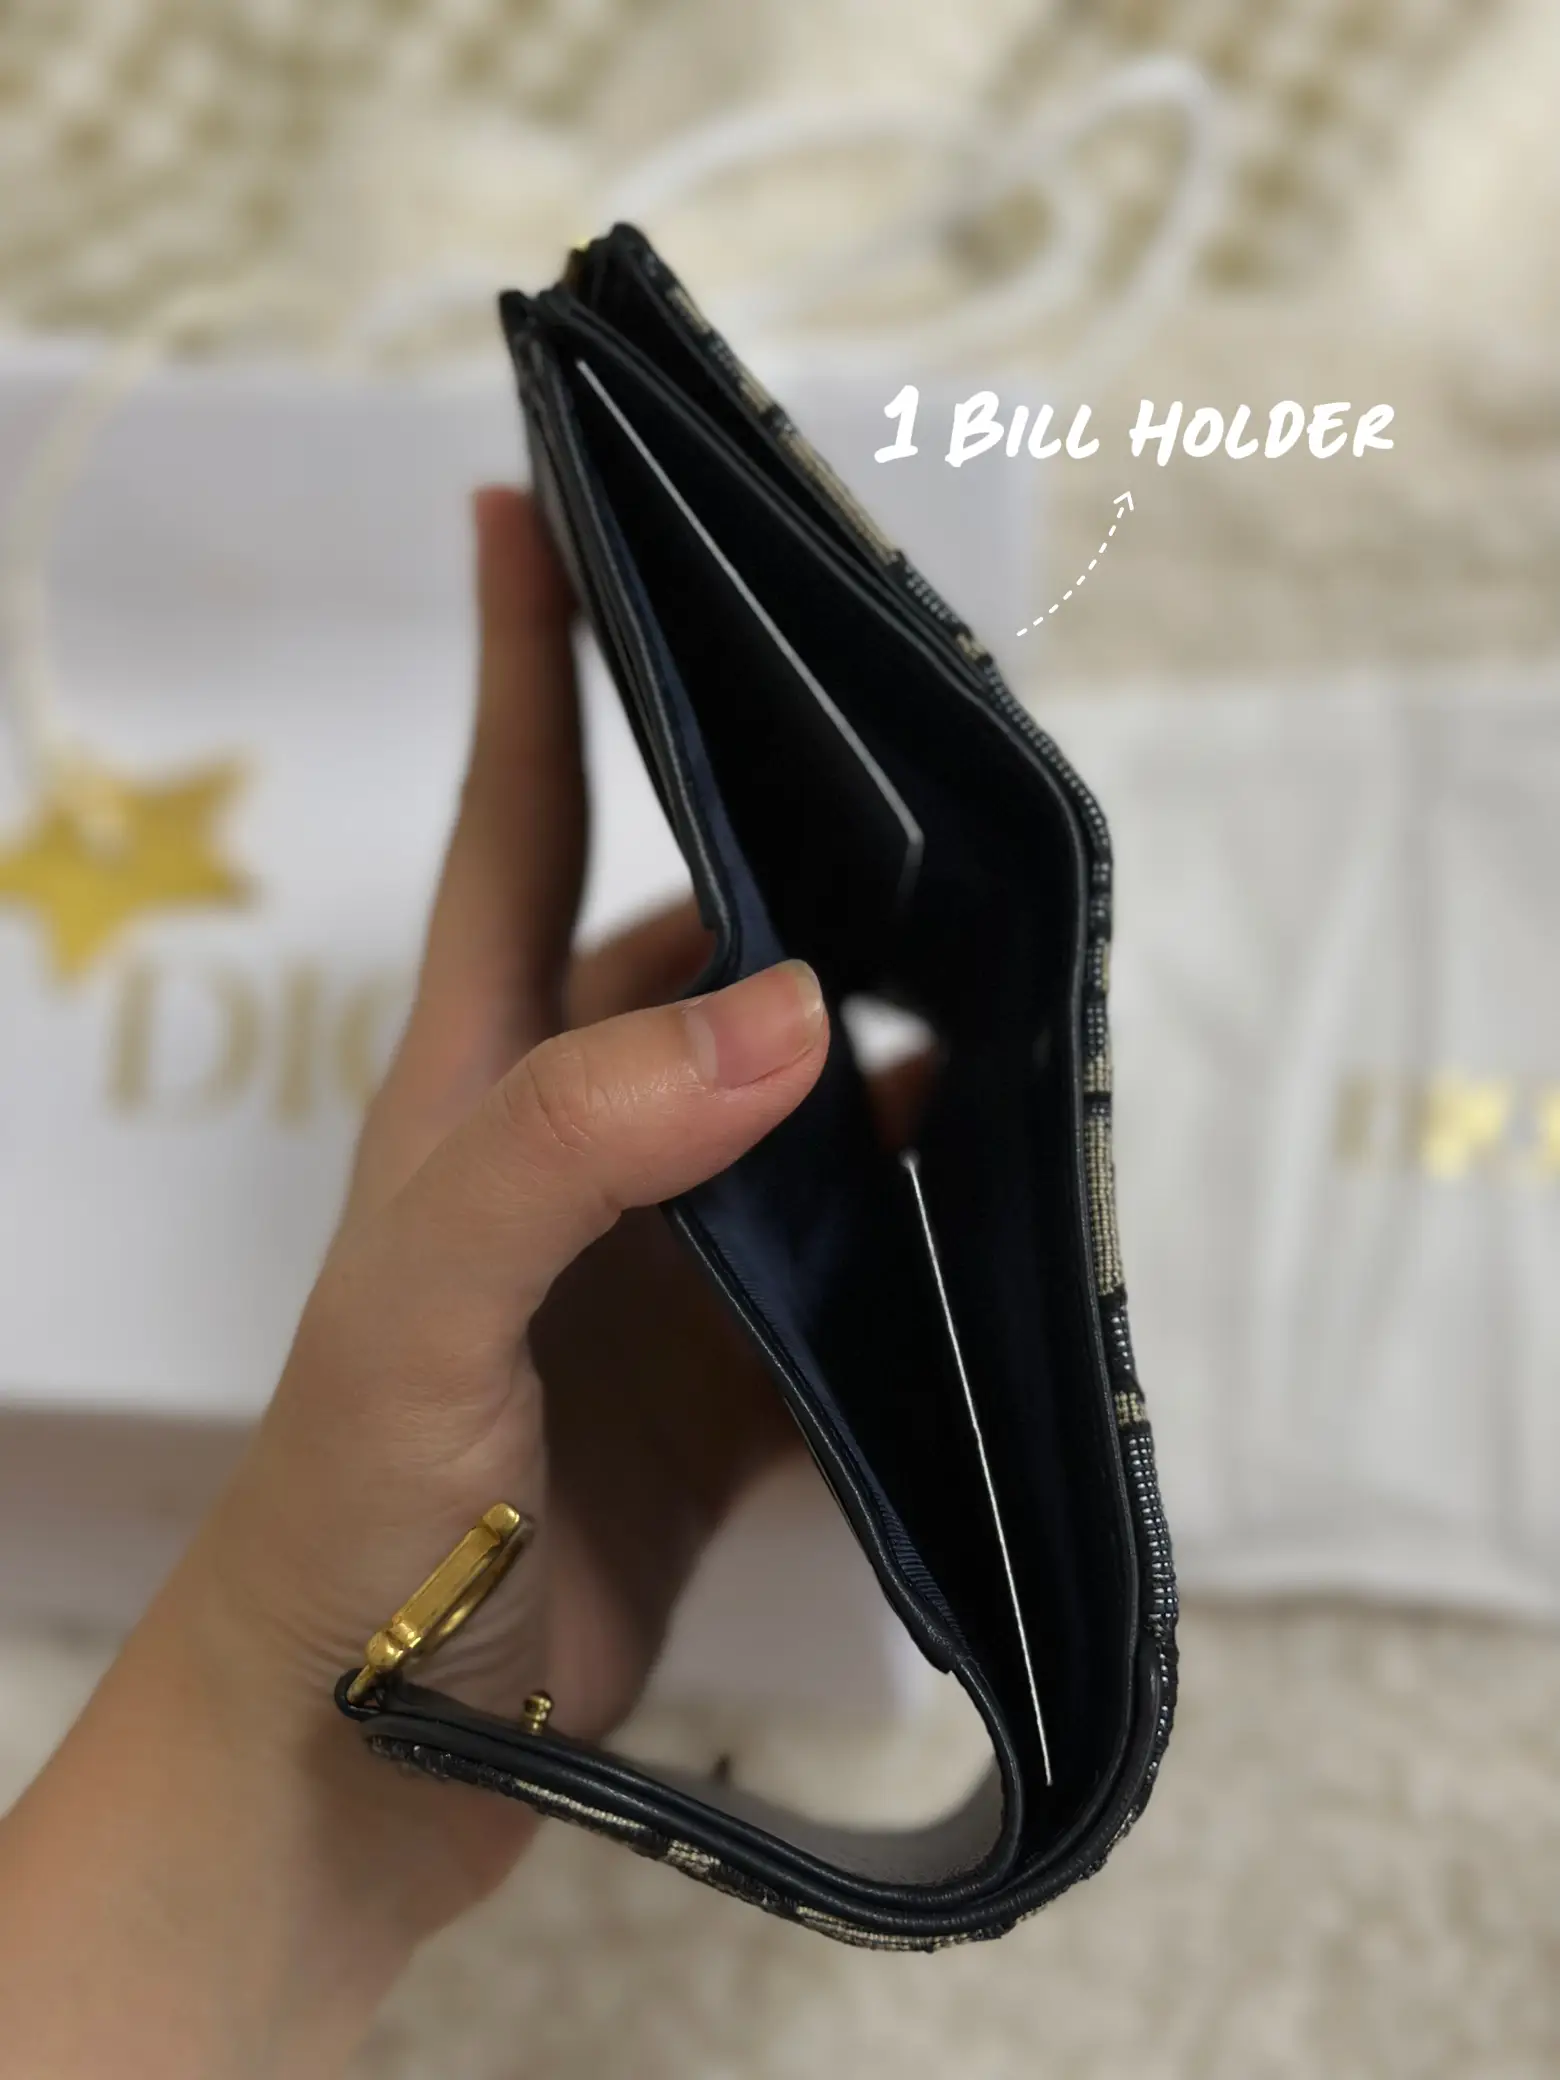 DIOR Saddle Lotus Wallet for $629 😏 WORTH IT?!